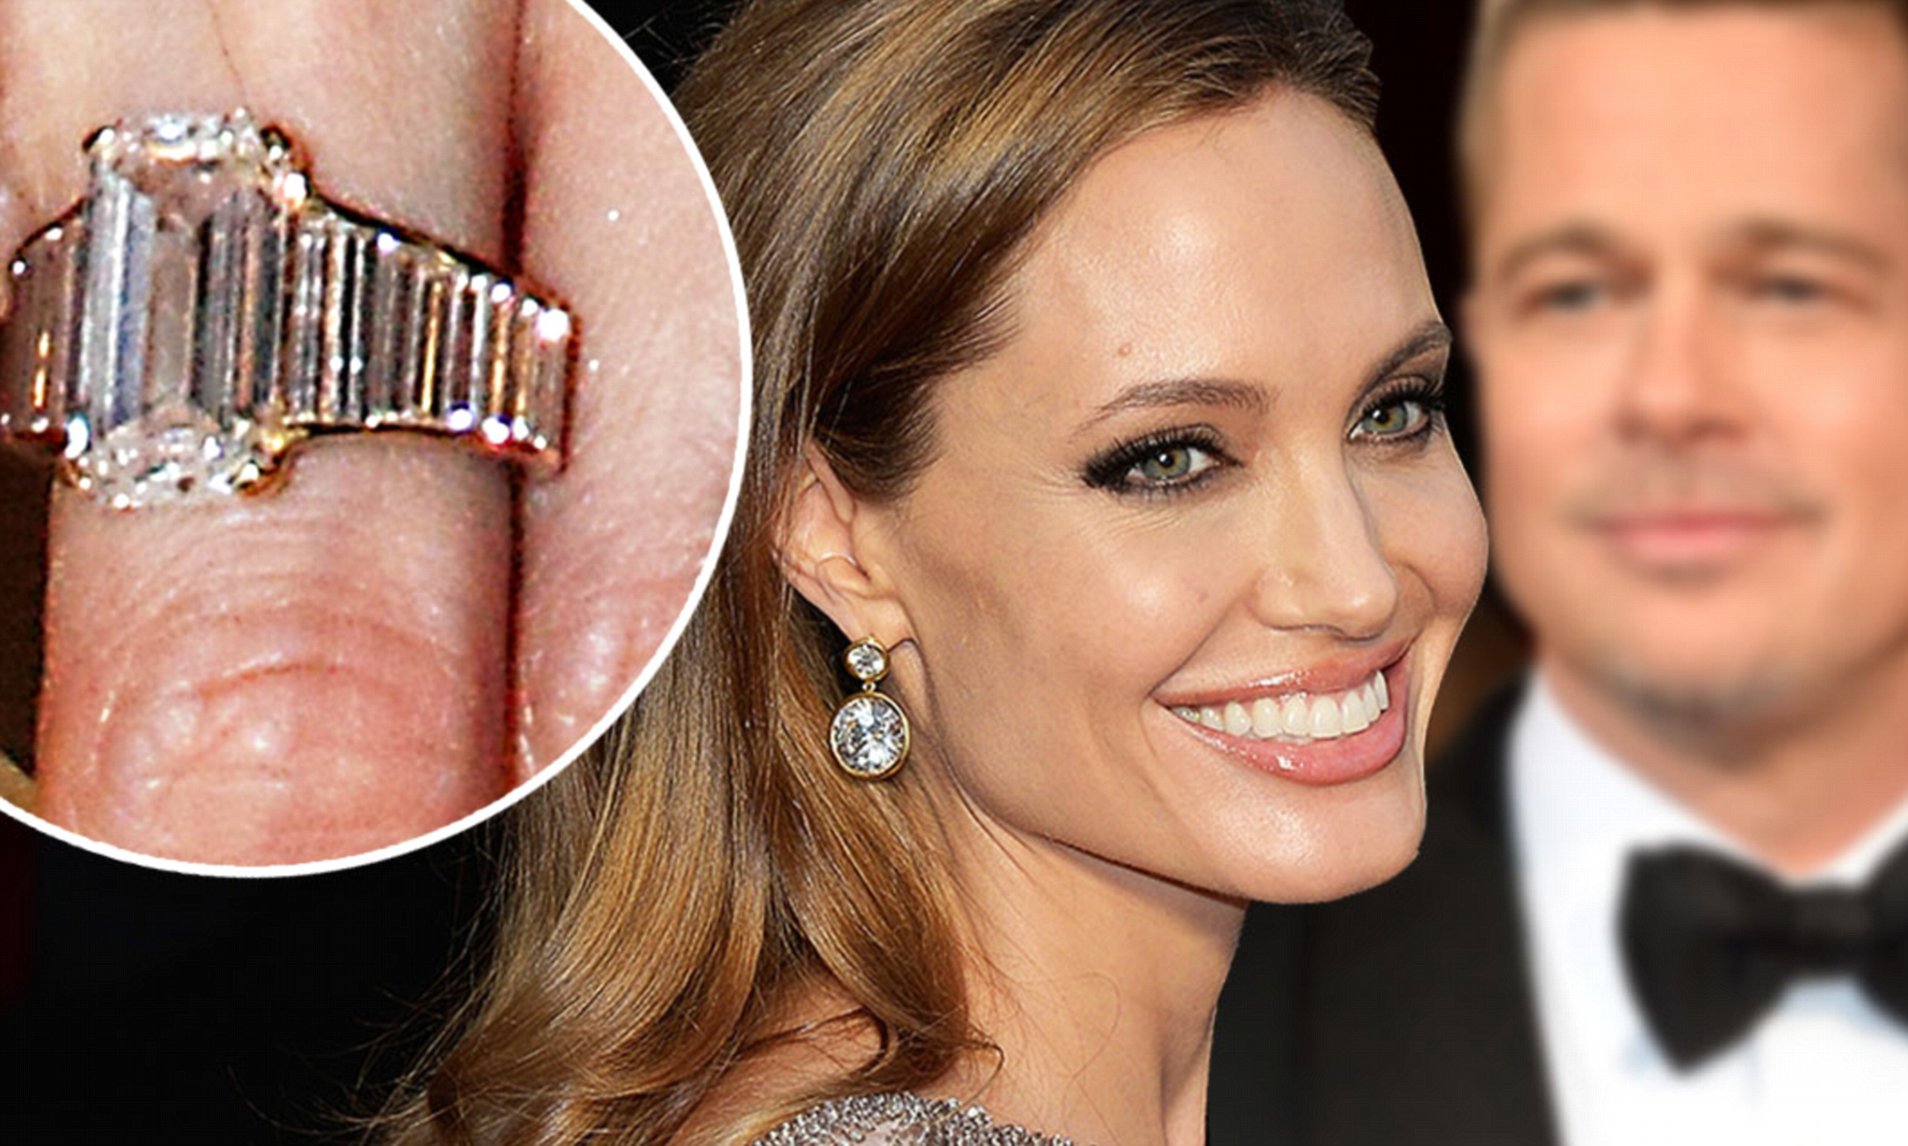 A fresh look at Angelina Jolie's stunning engagement ring